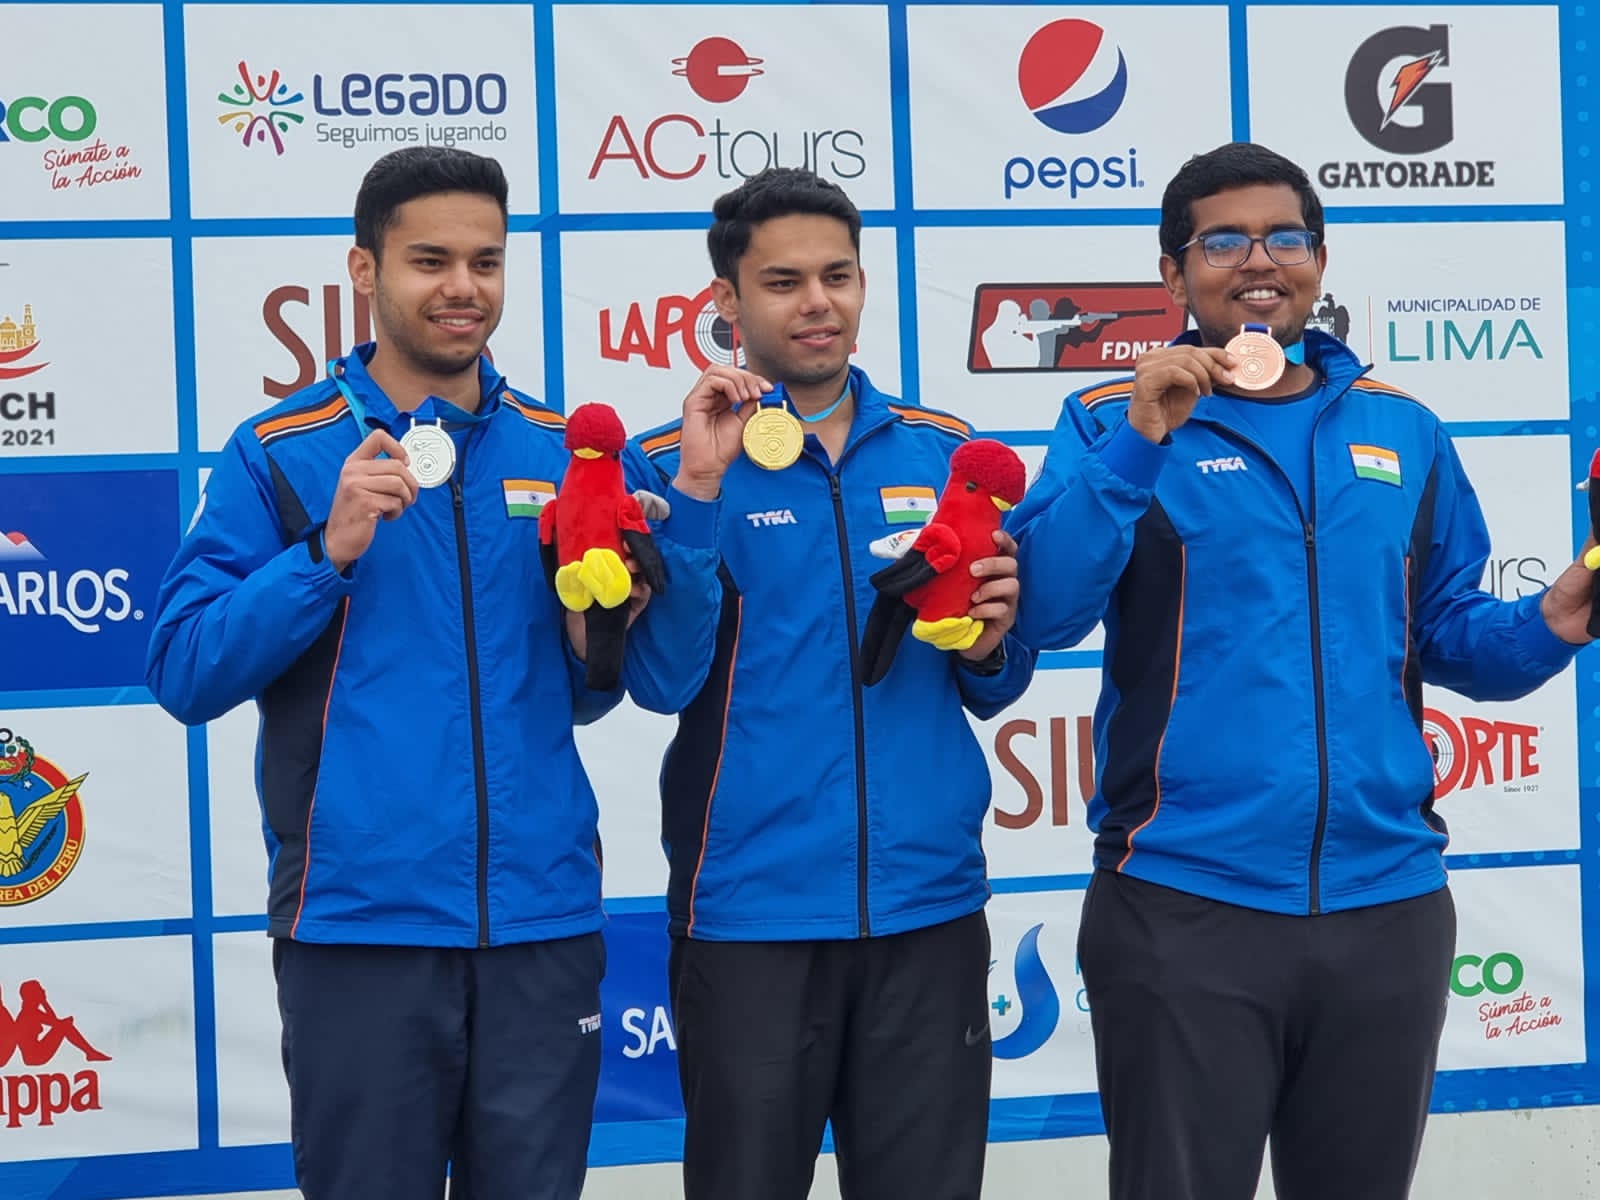 2021 ISSF World Championships | India end campaign as the most successful nation, with 43 medals